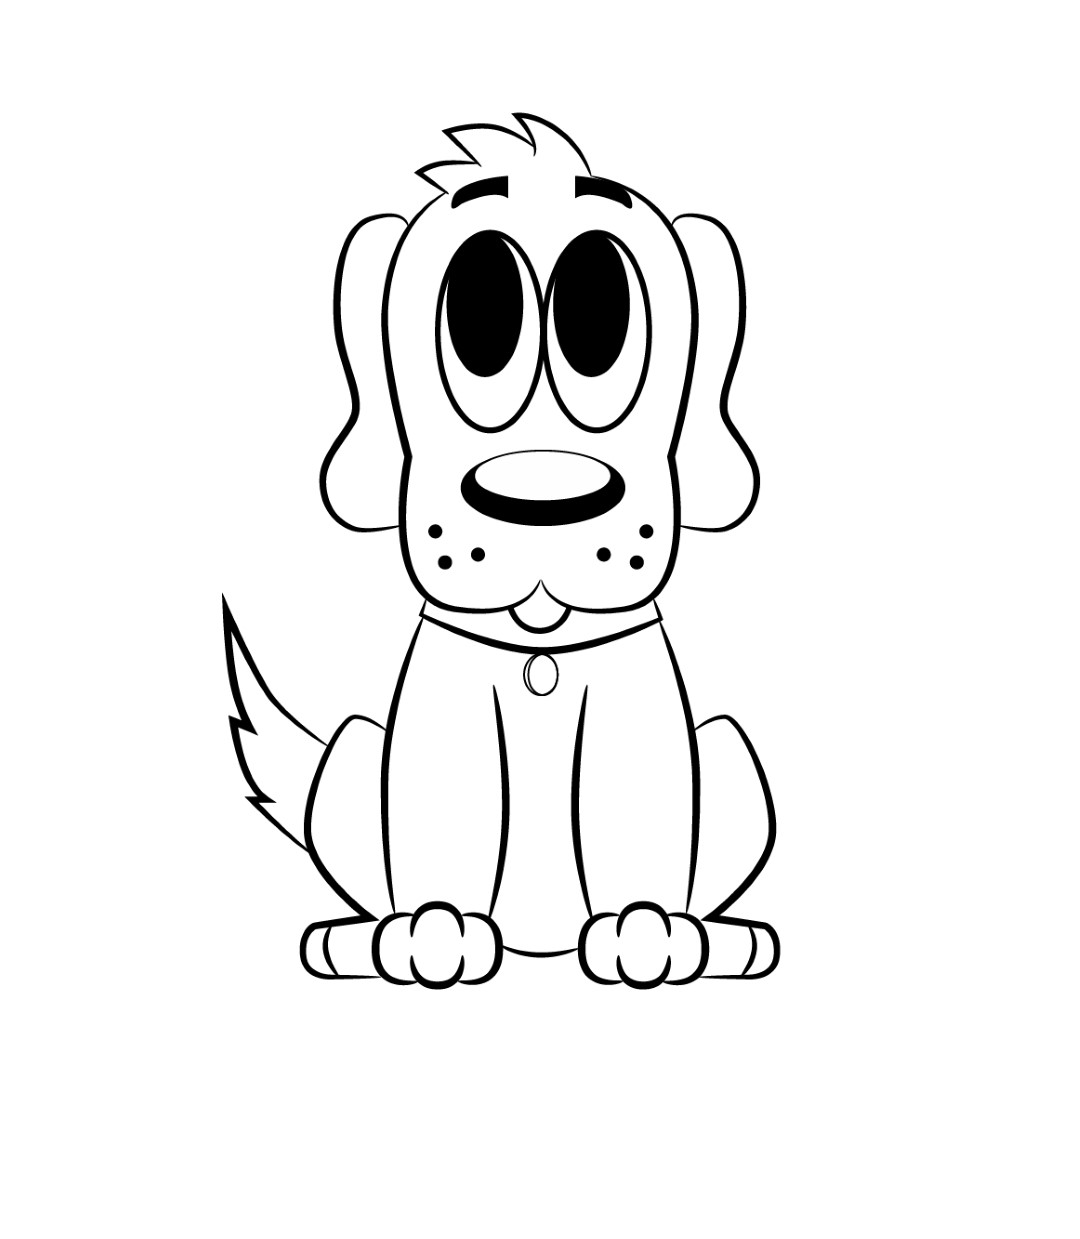 Free Line Drawing Of A Dog, Download Free Line Drawing Of A Dog png